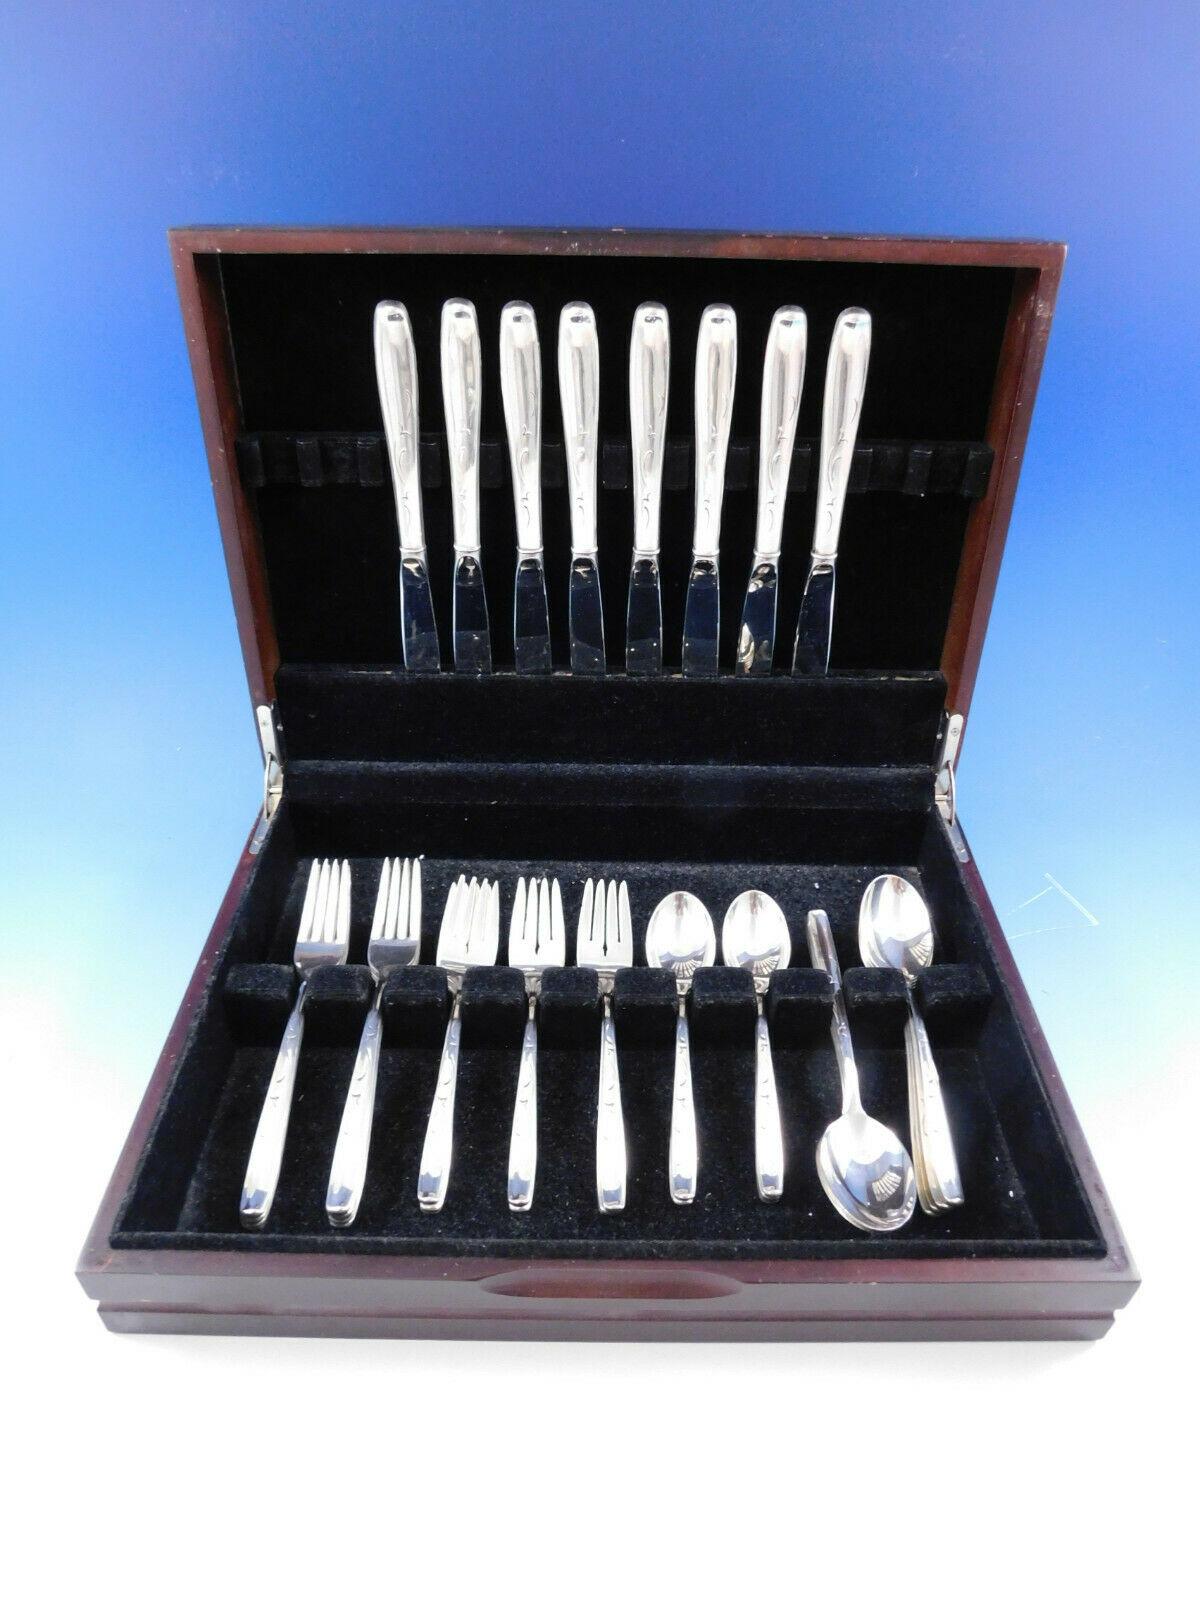 Silhouette by International sterling silver flatware set, 40 pieces. This scarce pattern was introduced in the year 1957. This set includes:

8 knives, 9 1/4